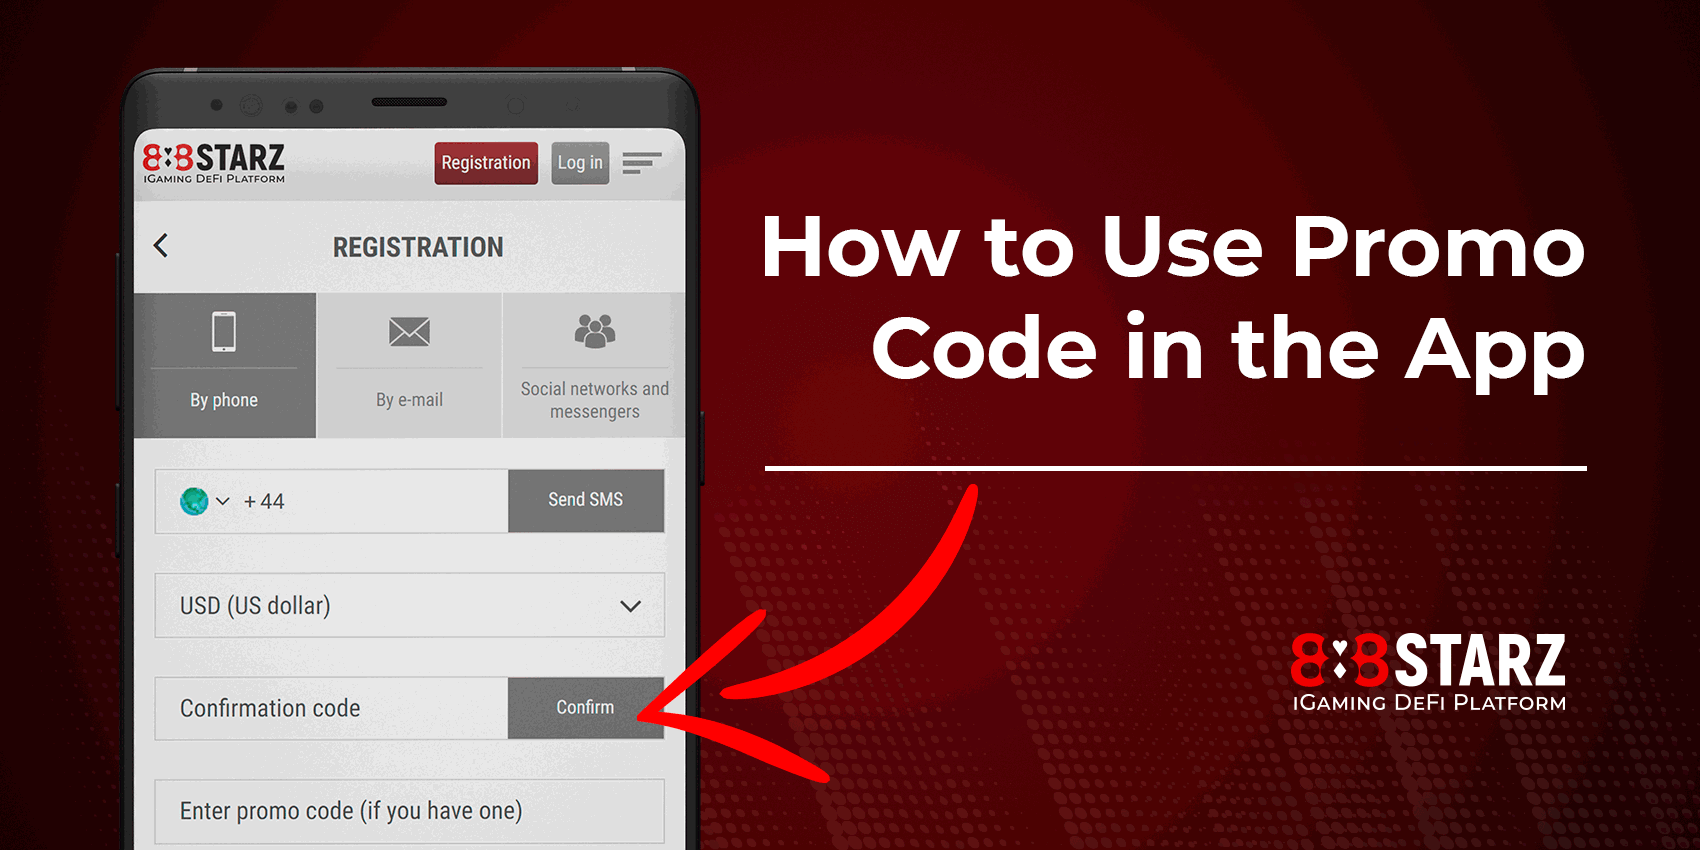 how to add promocode using 888starz mobile app